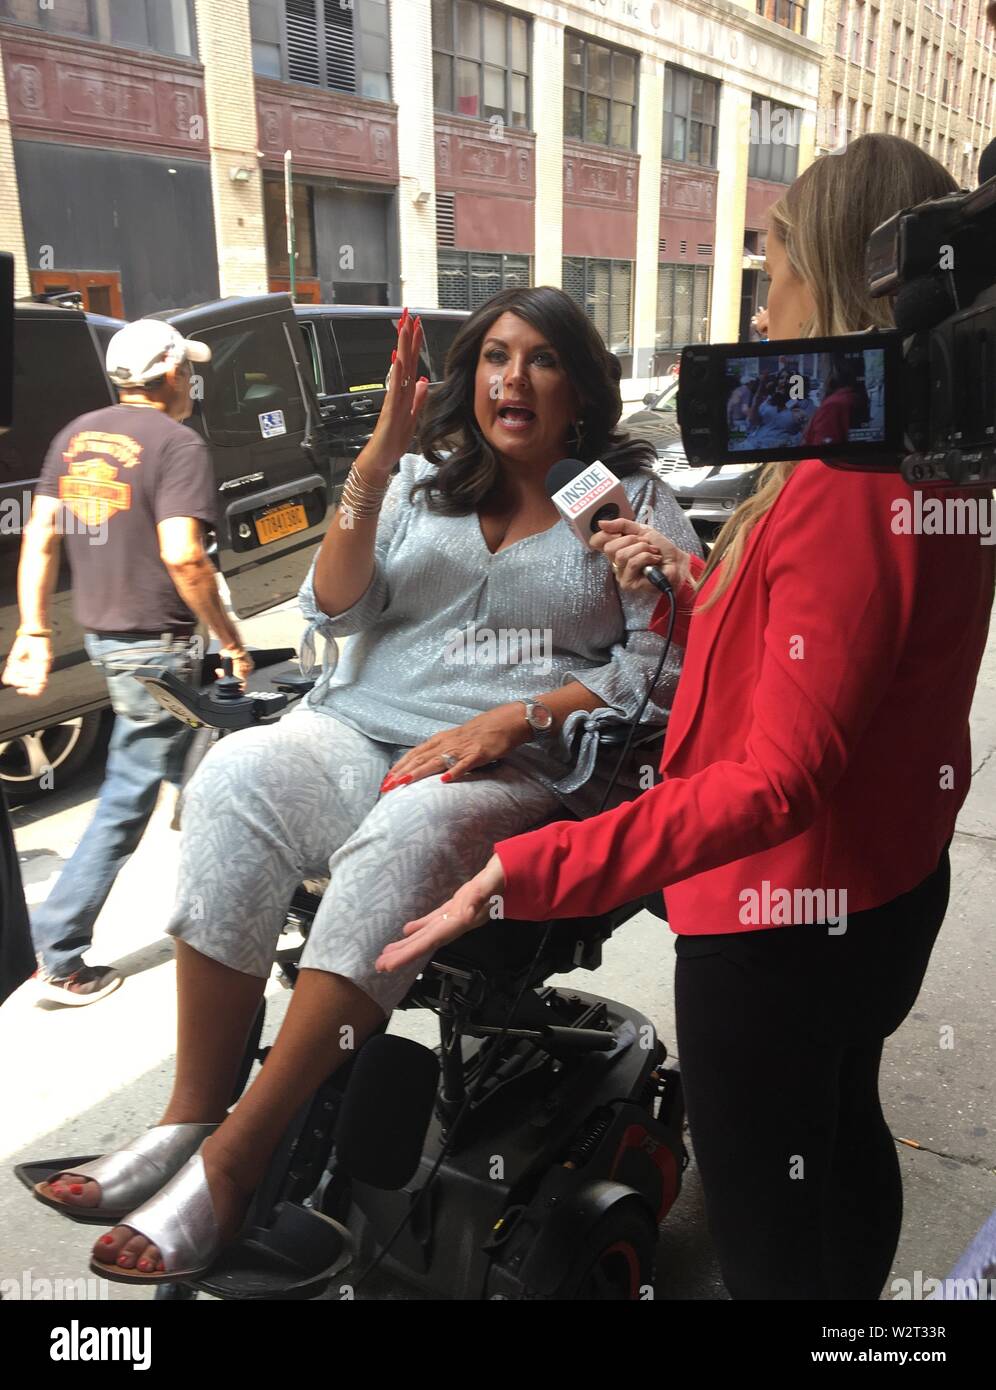 New York, NY, USA. 10th July, 2019. 'Dance Moms' star Abby Lee Miller stops to talk to the press about her incident at the airport with American Airlines as she leaves 'The Wendy Williams Show' in New York, New York on July 10, 2019. Credit: Rainmaker Photo/Media Punch/Alamy Live News Stock Photo